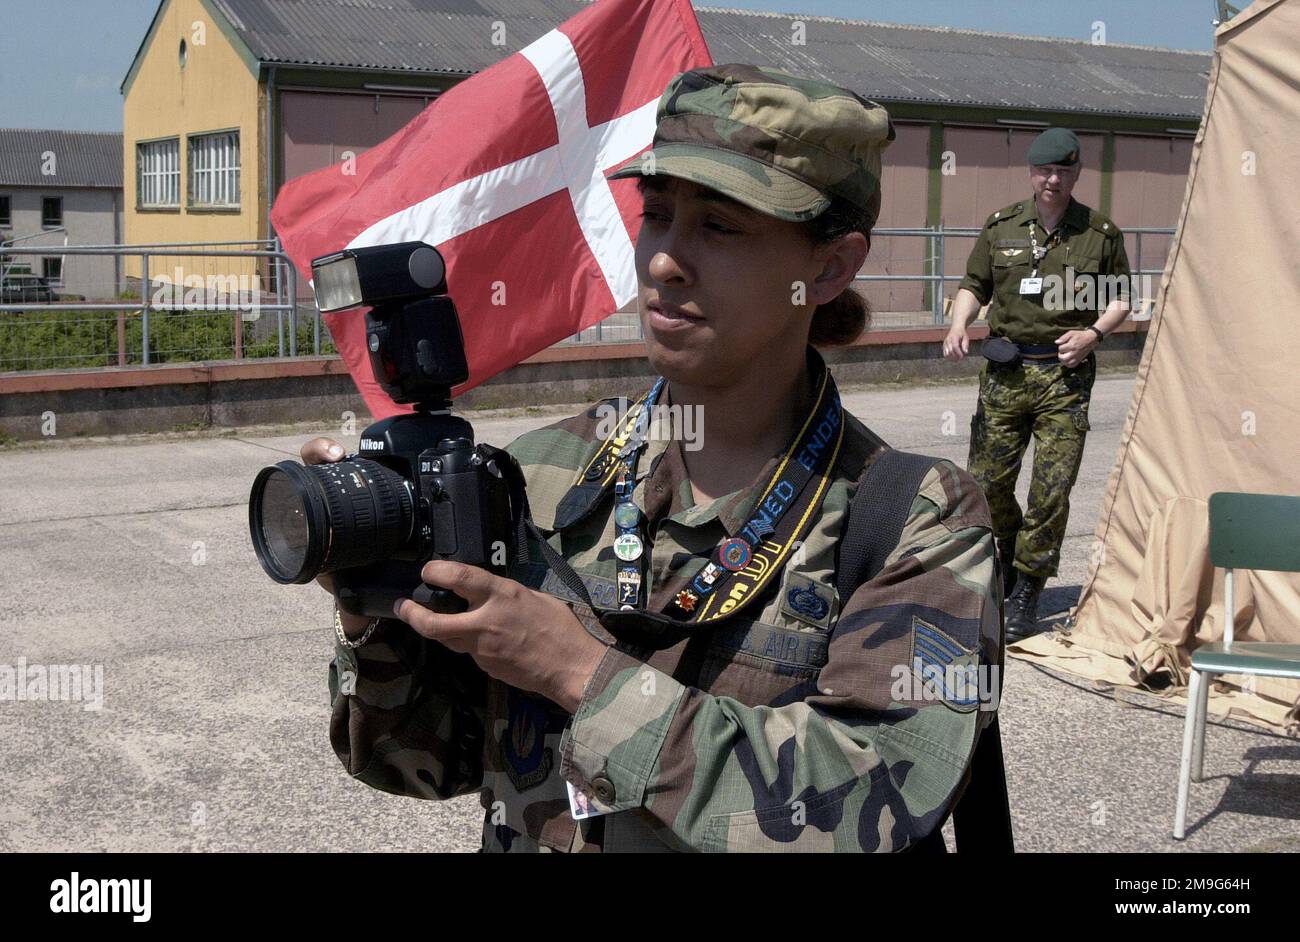 US Air Force STAFF Sergeant Jocelyn Broussard, a photographer from US Air Forces in Europe, shoots photos at the Danish delegation's tent in Lager Aulenbach, Germany, during Exercise COMBINED ENDEAVOR, the largest communications and information systems exercise in the world. The exercise, sponsored by US European Command and hosted by Germany in the spirit of 'Partnership for Peace,' is held annually to test and document the interoperability of dozens of nations and NATO. Subject Operation/Series: COMBINED ENDEAVOR 2001 Base: Lager Aulenbach State: Rheinland-Pfalz Country: Deutschland / German Stock Photo